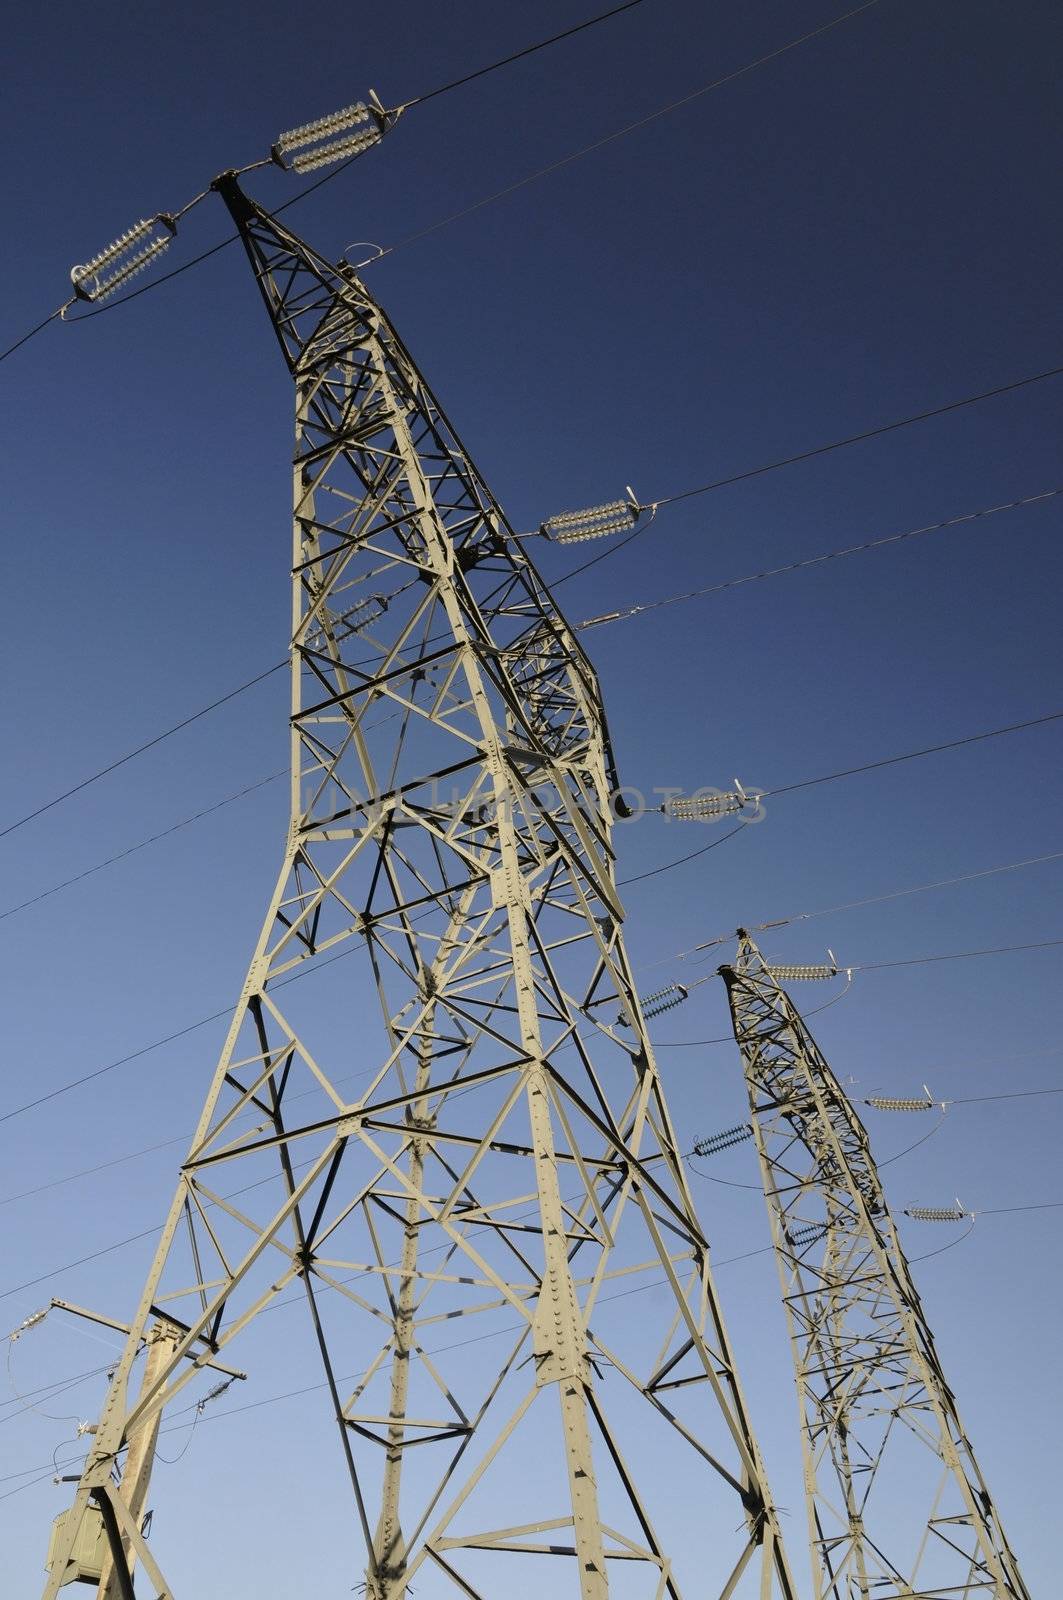 Two Big Electricity Pylons with a Blue Sky